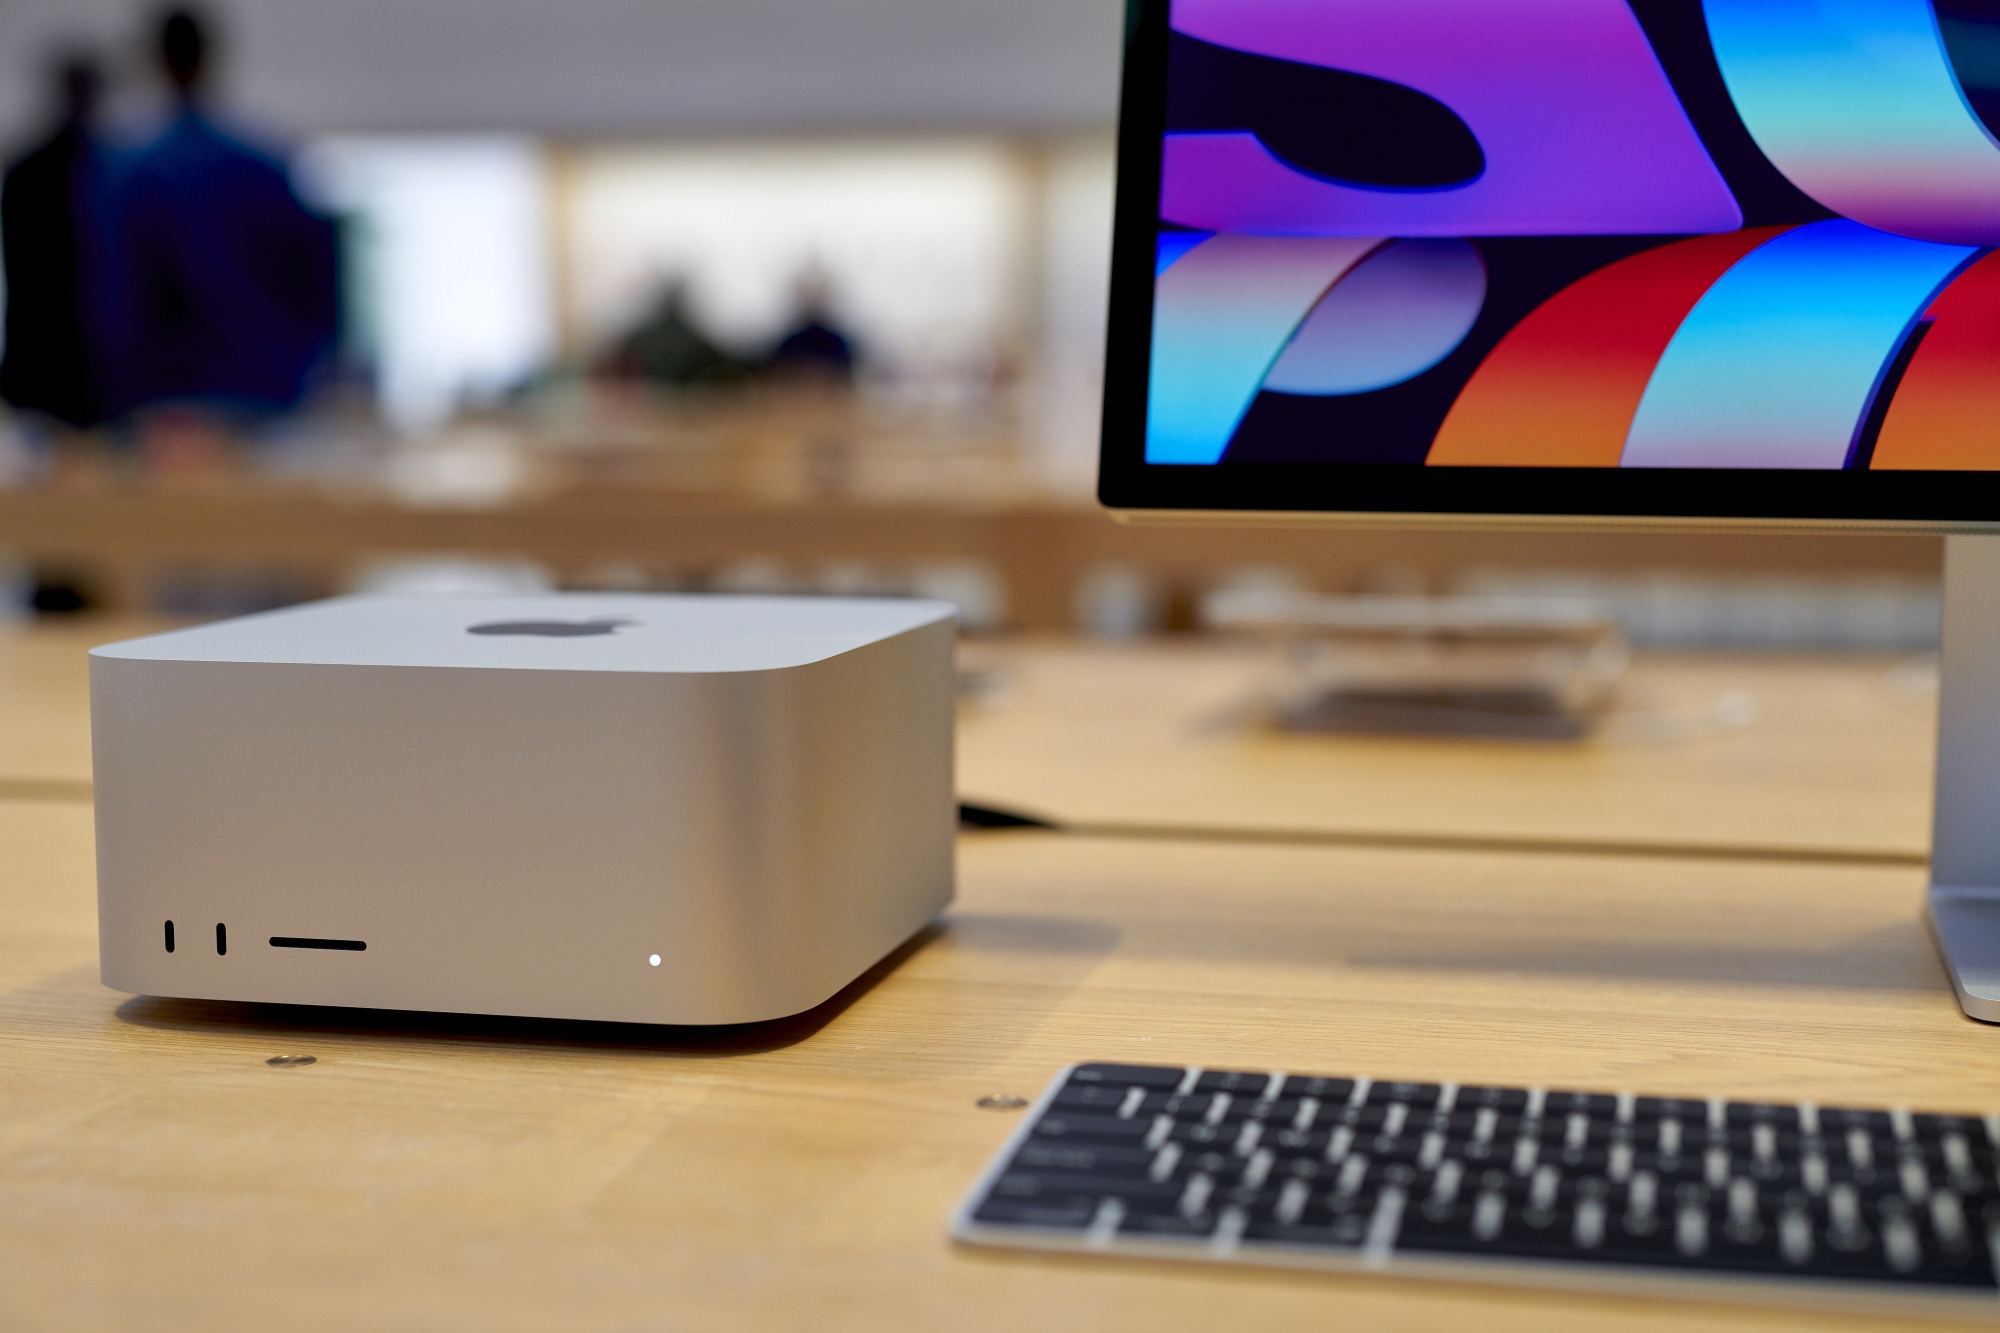 Mac Studio unveiled: The Most Powerful Apple PC Ever